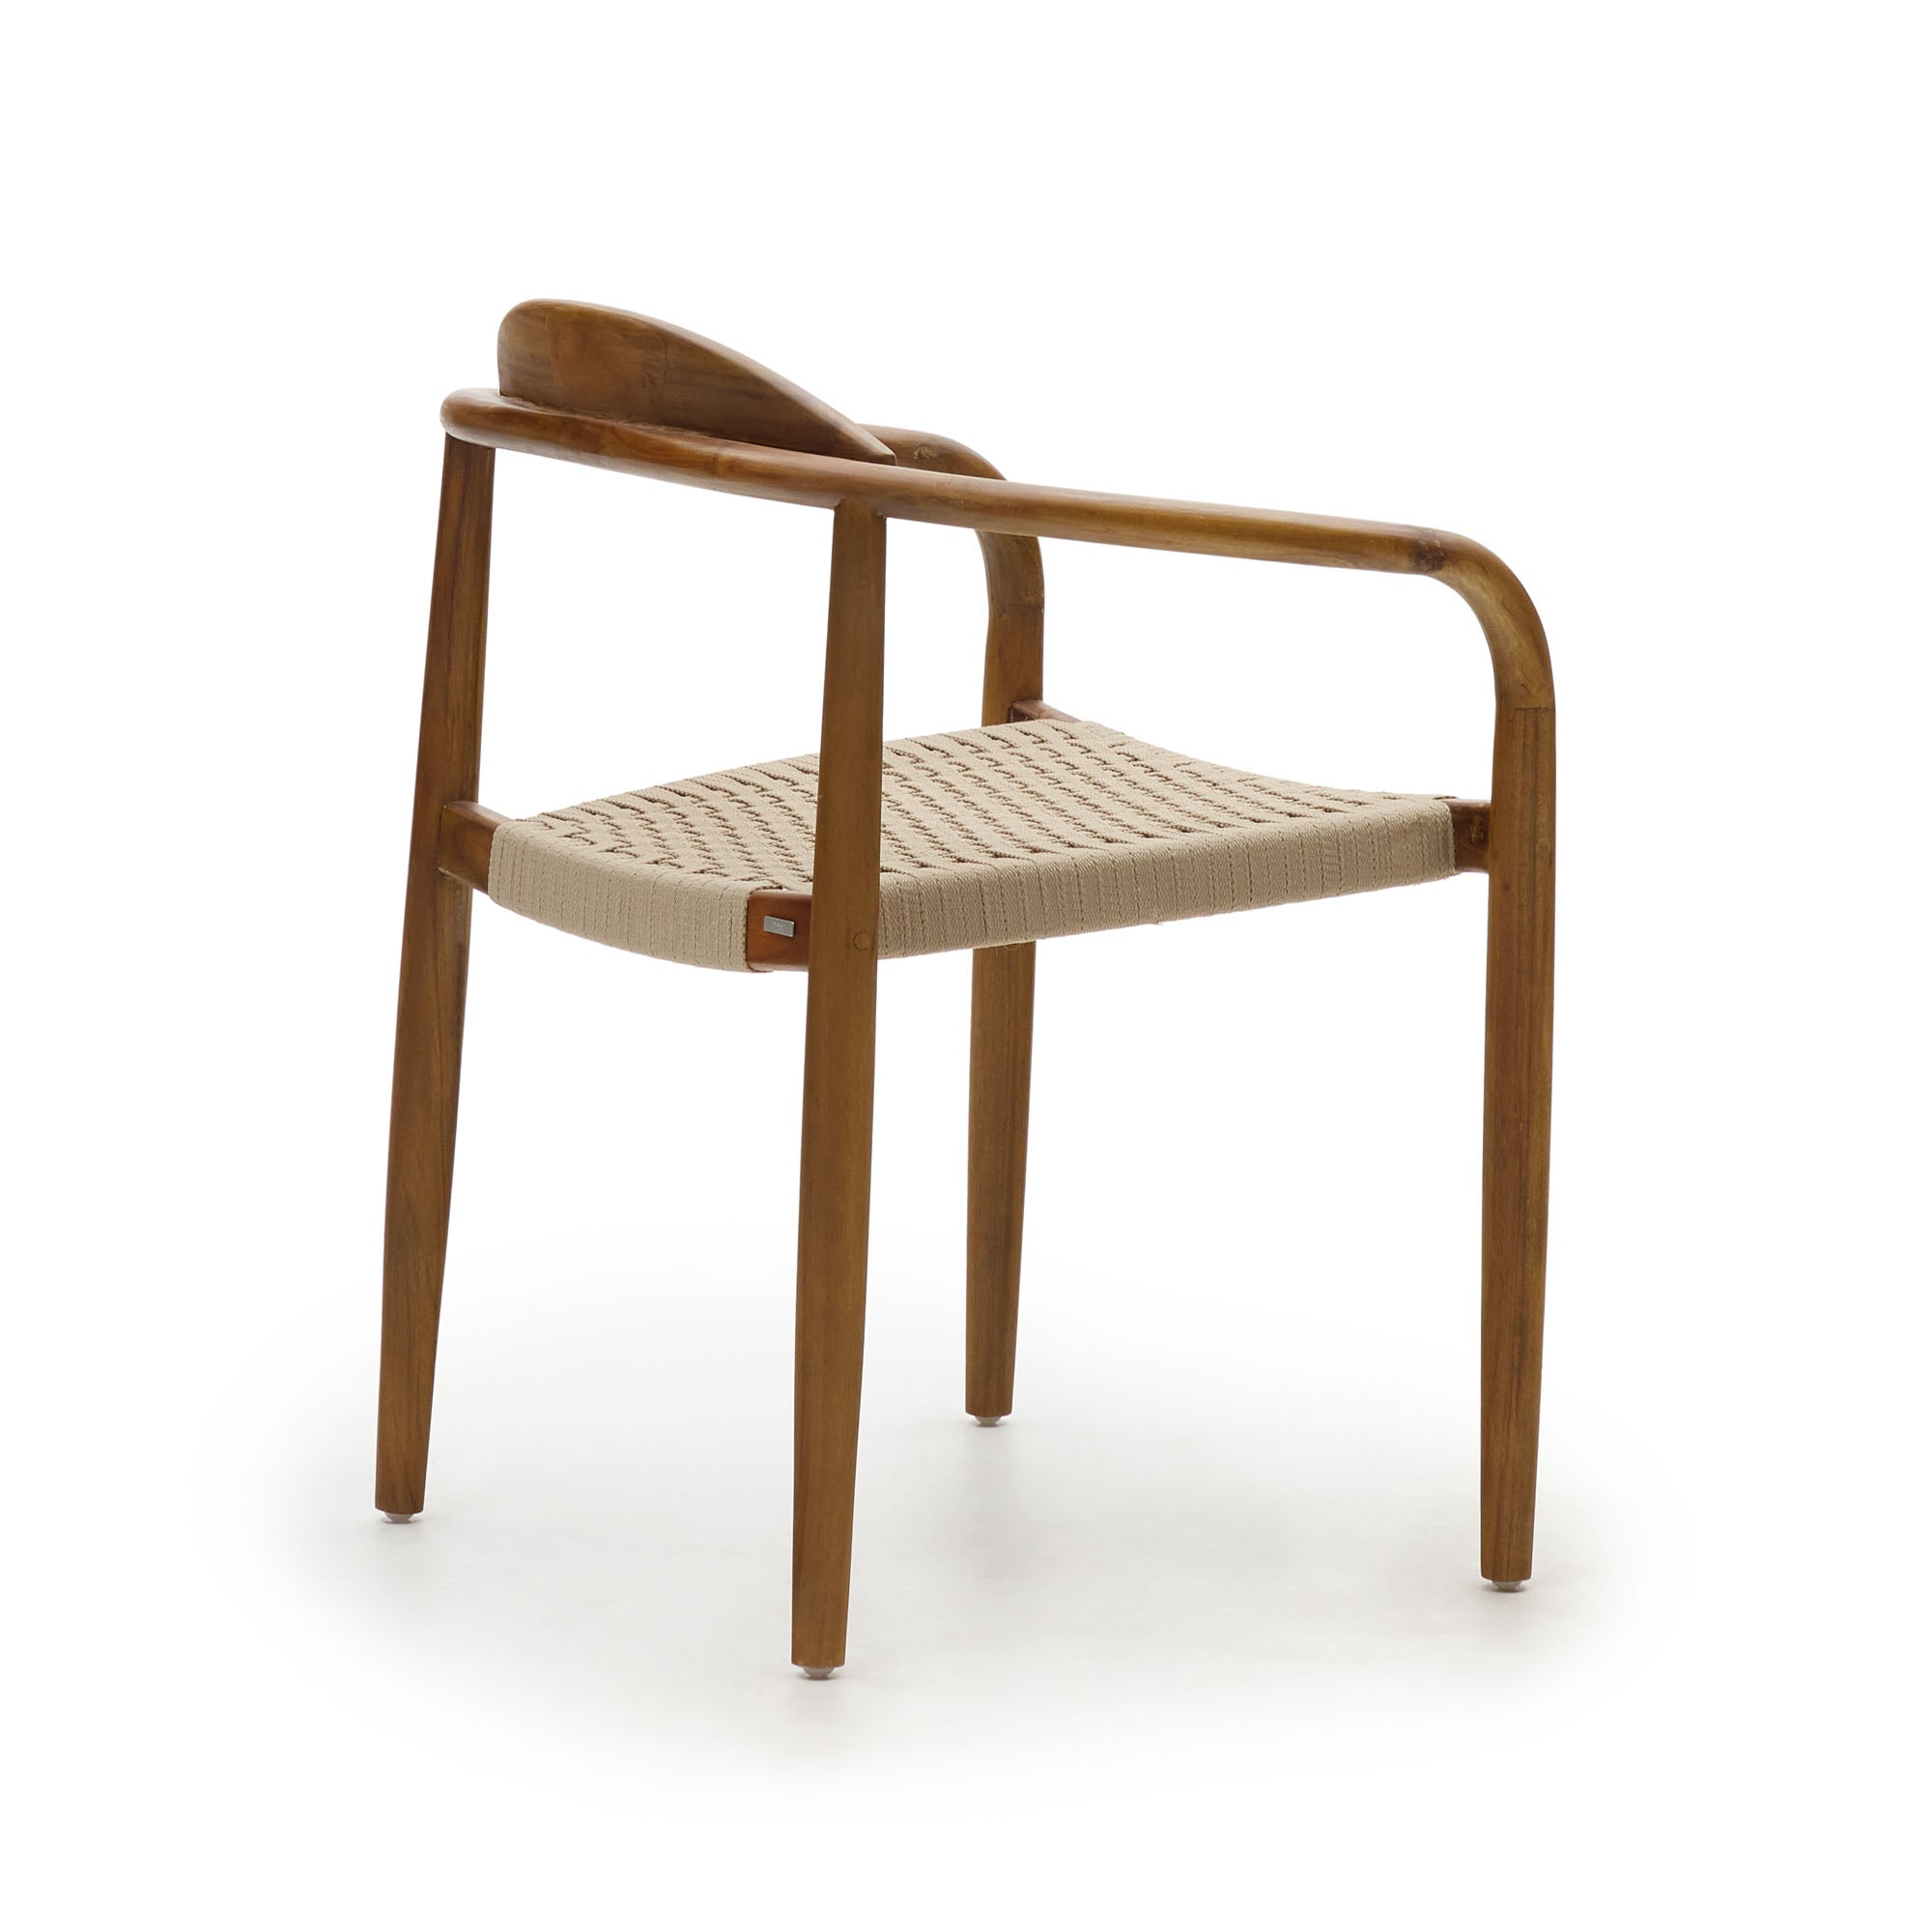 Nina stackable chair in solid acacia wood with walnut finish and beige rope seat